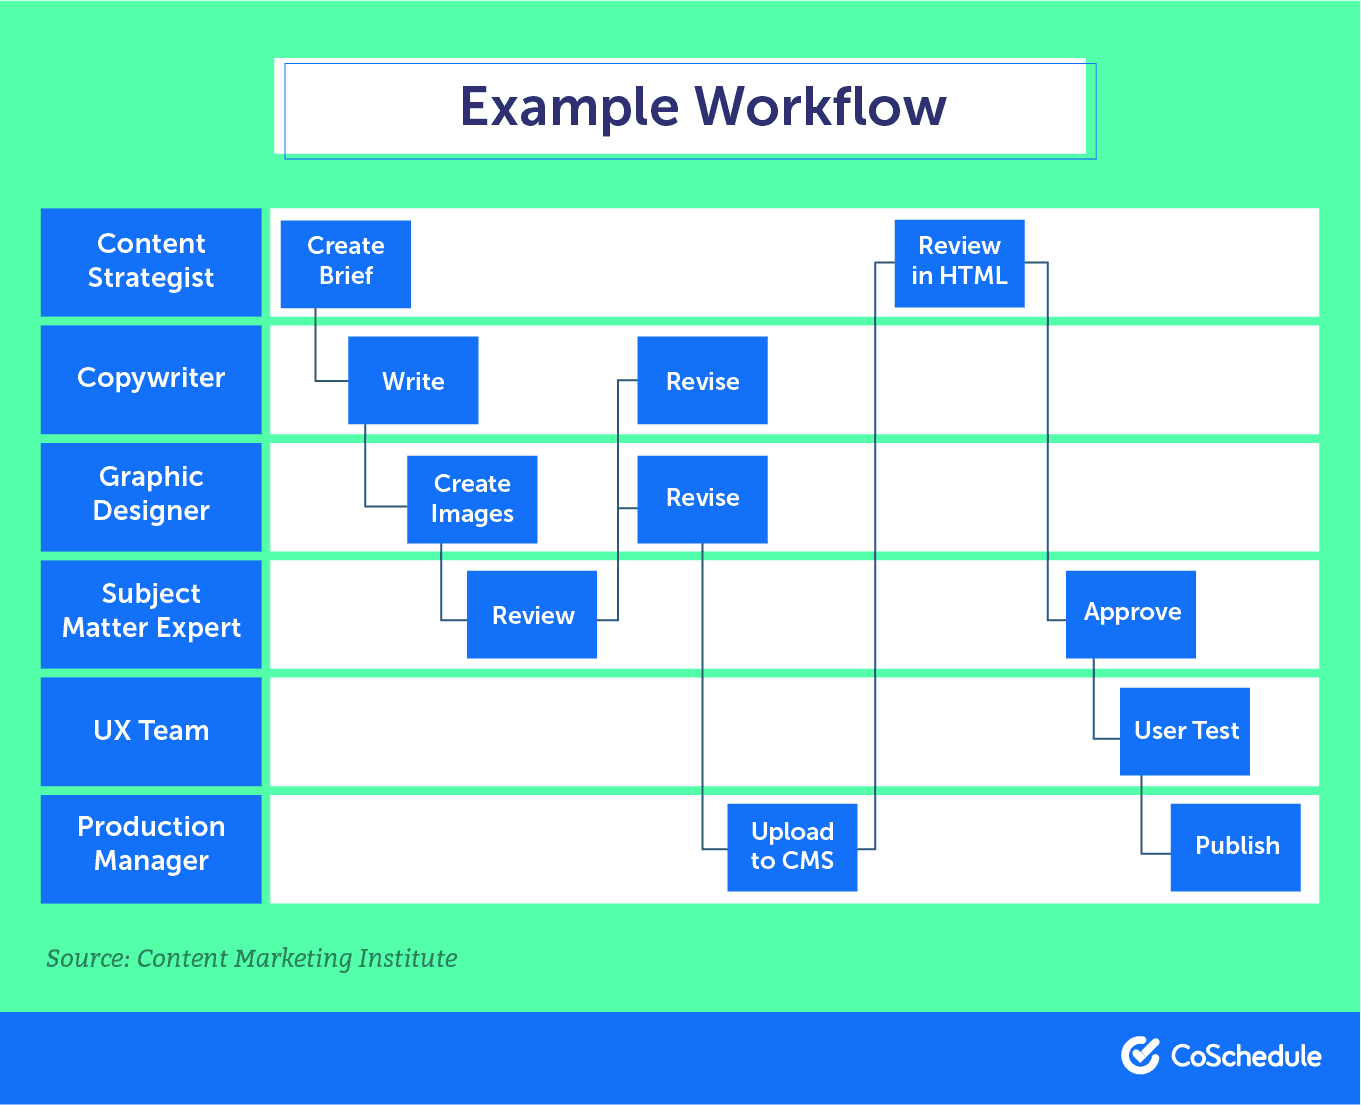 Example of a finished workflow